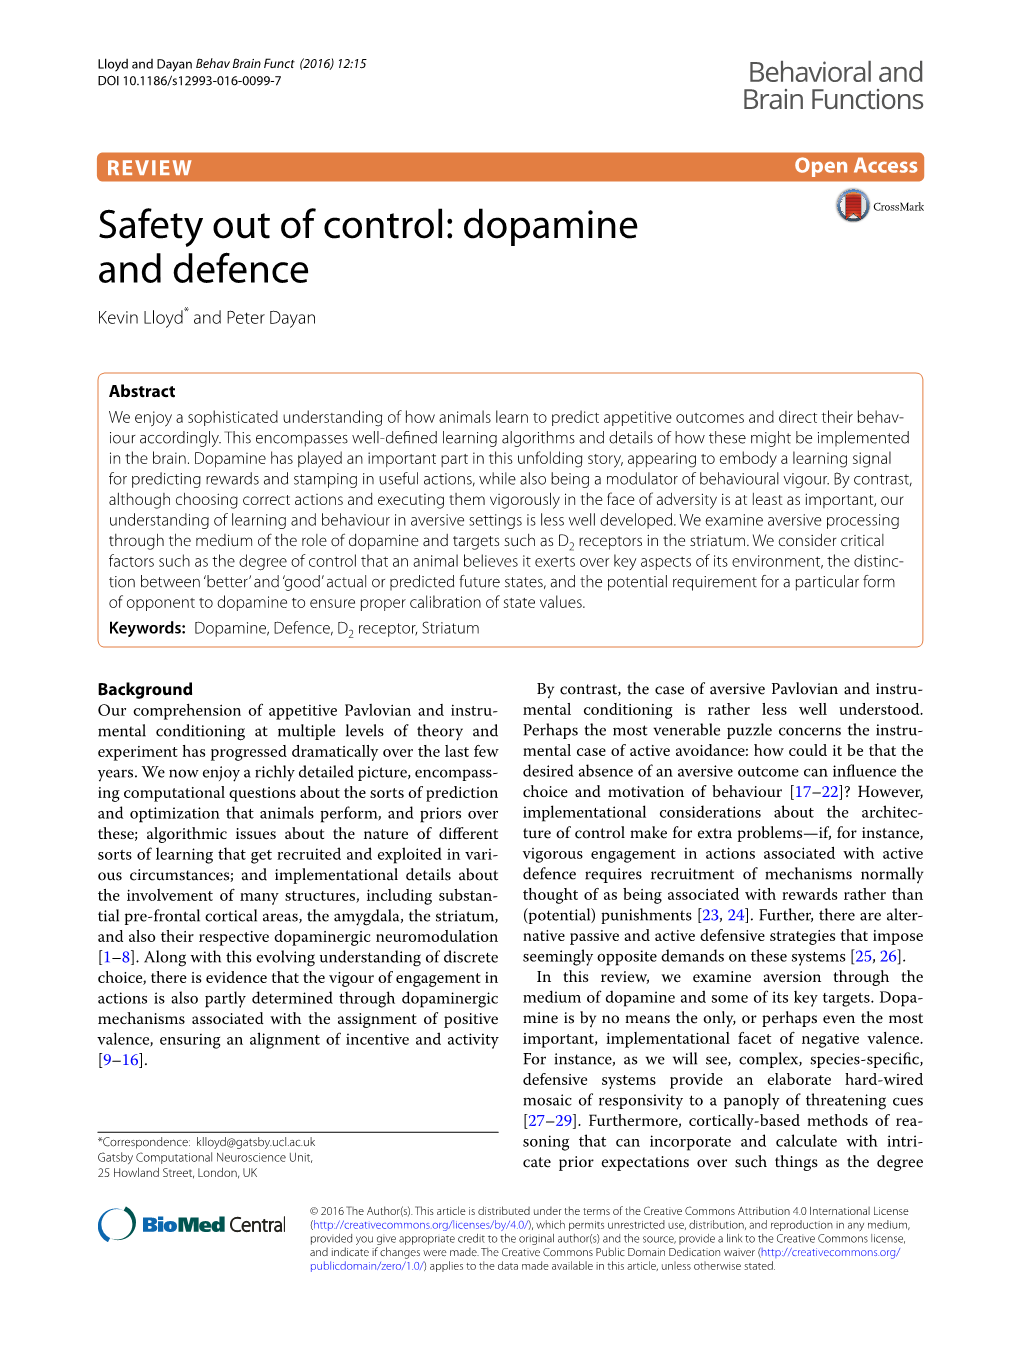 Safety out of Control: Dopamine and Defence Kevin Lloyd* and Peter Dayan